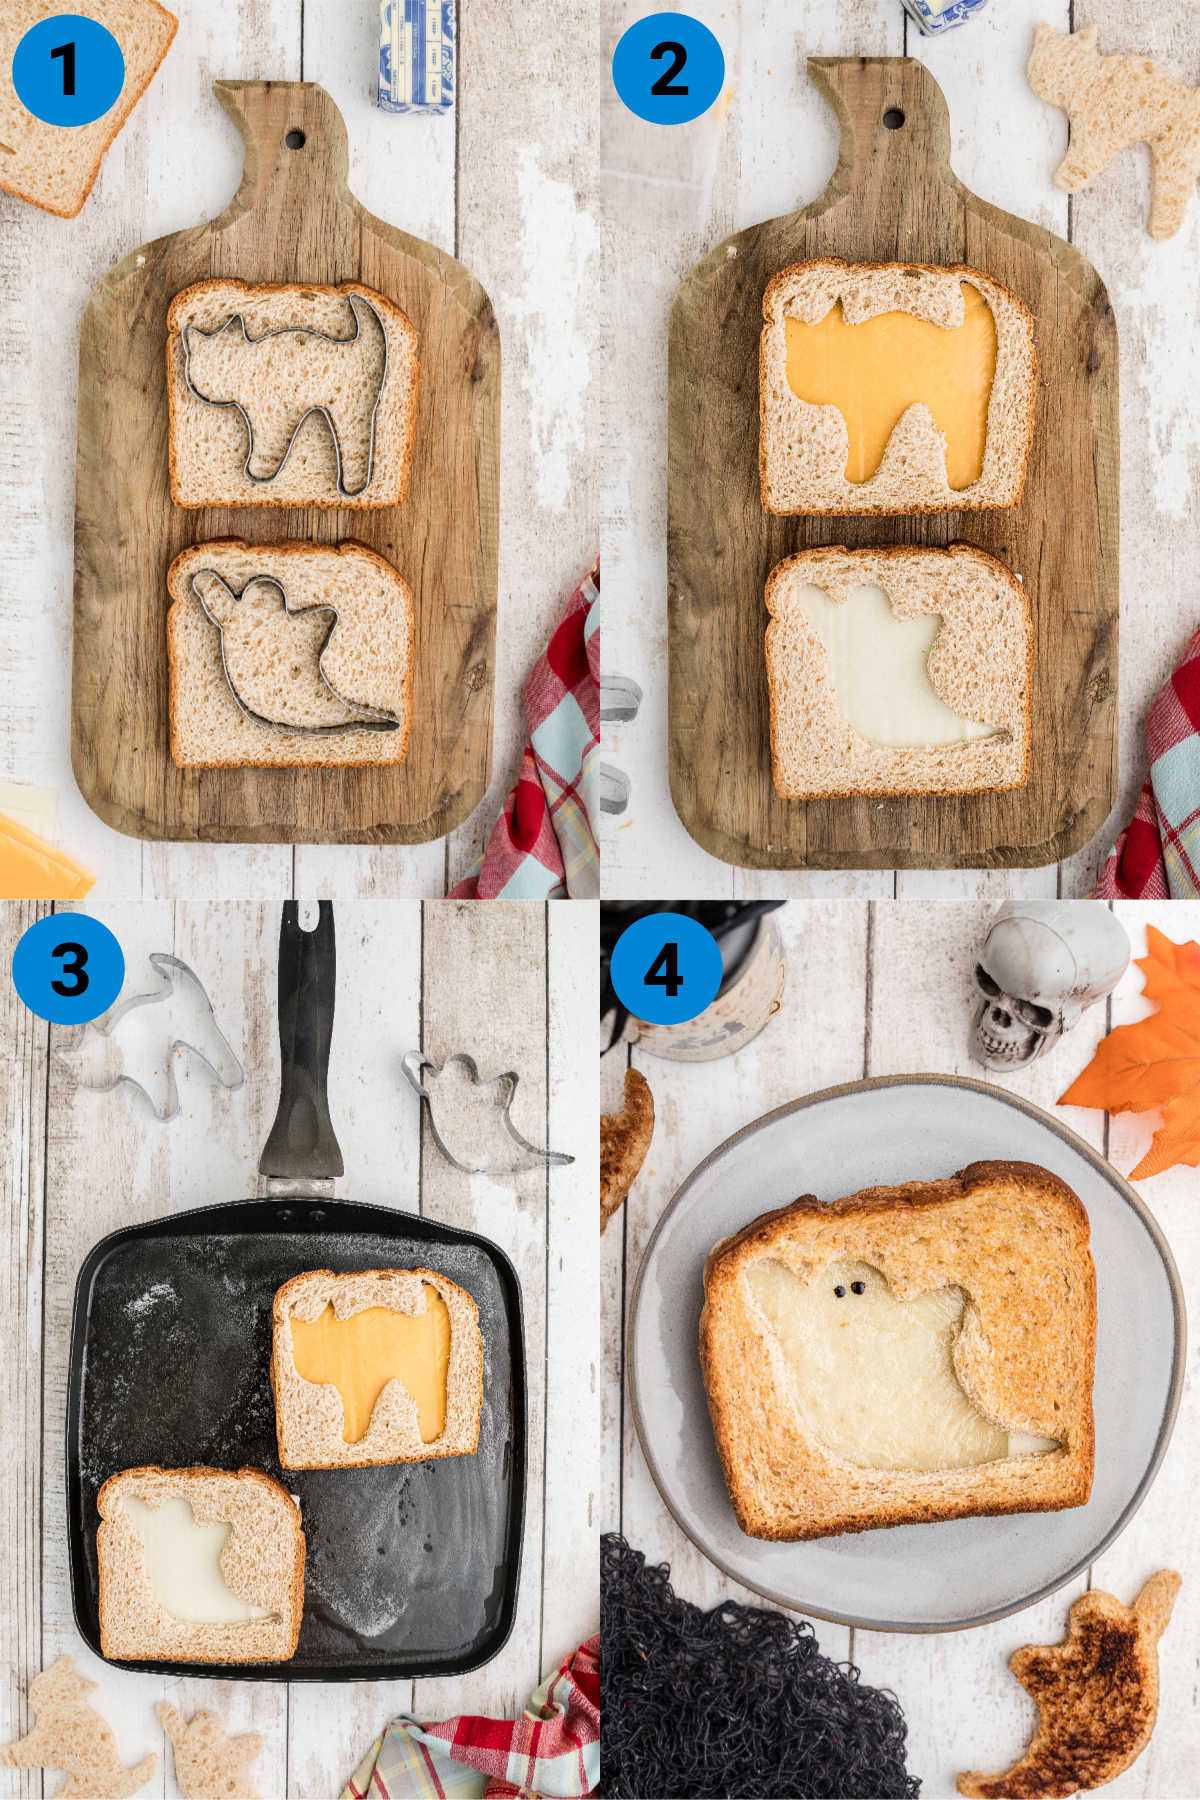 Collage of four images showing how to assemble a halloween grilled cheese sandwich.